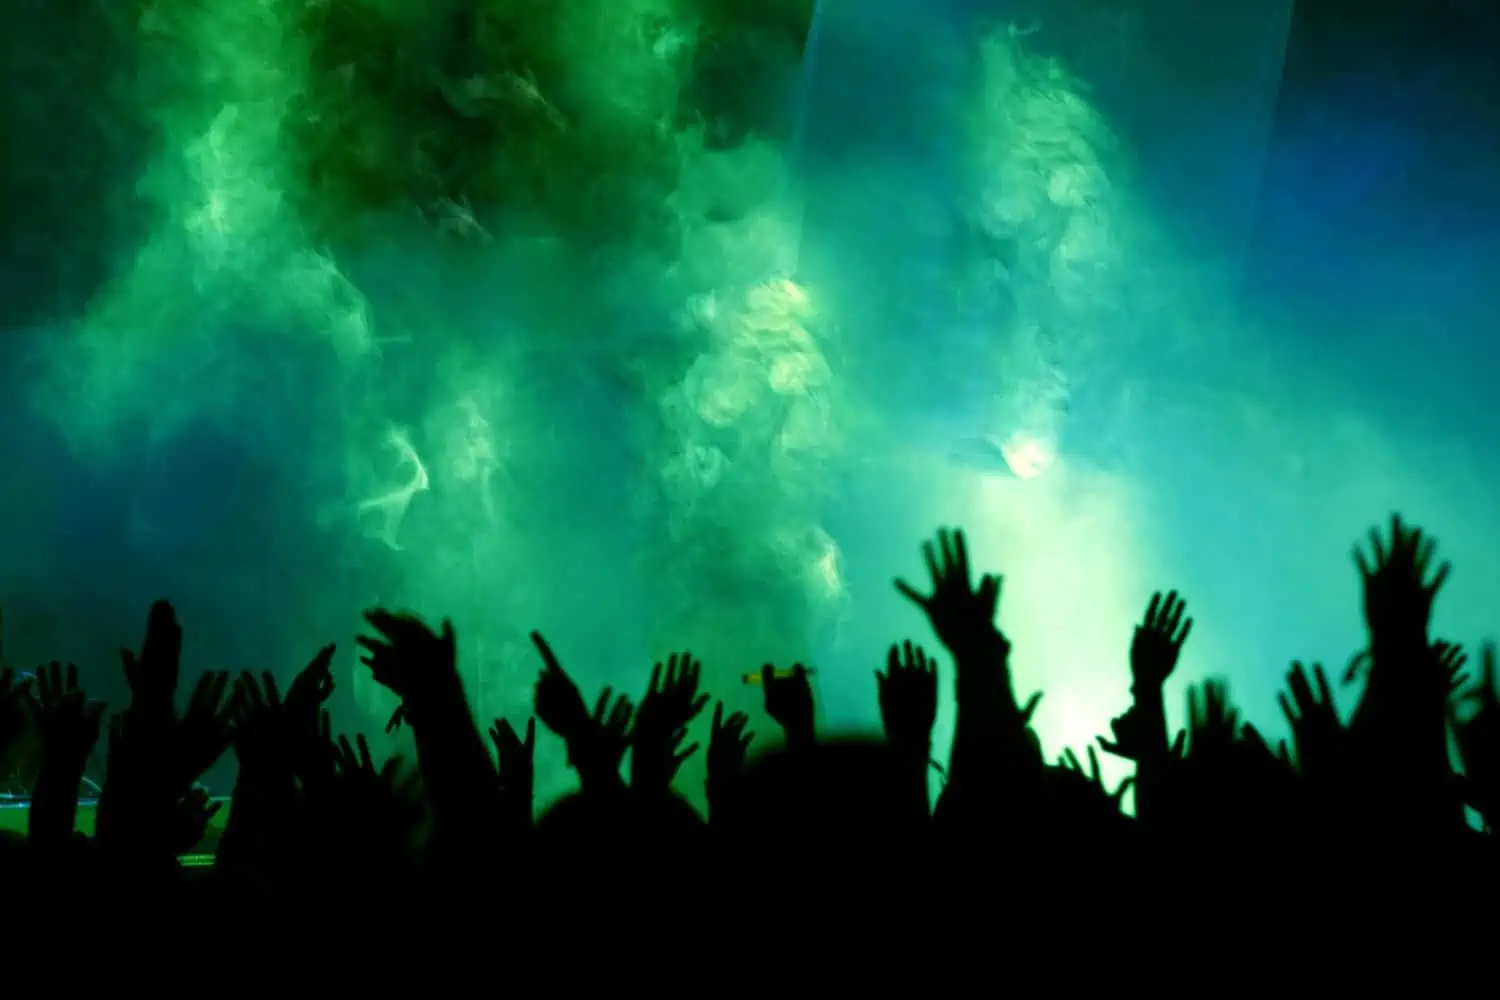 Party people raising their hands on concert with green stage lighting